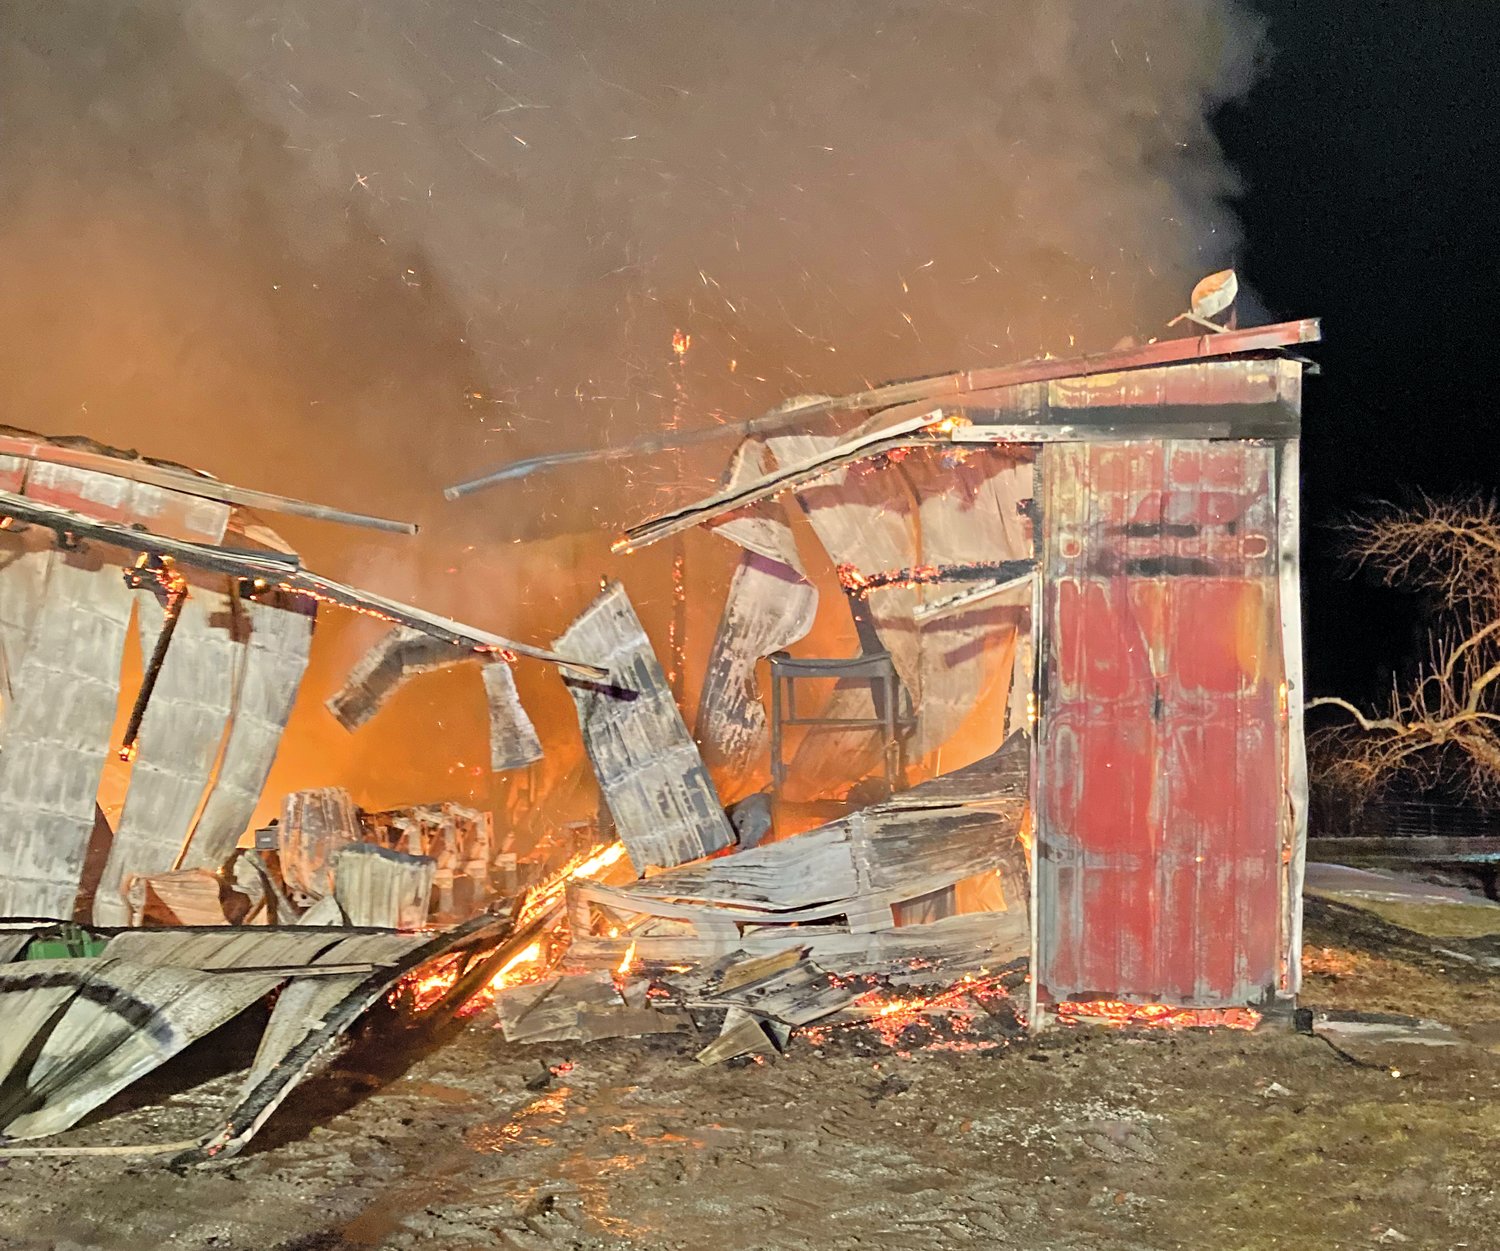 A machine shed and its contents were completely destroyed by fire on Saturday night.